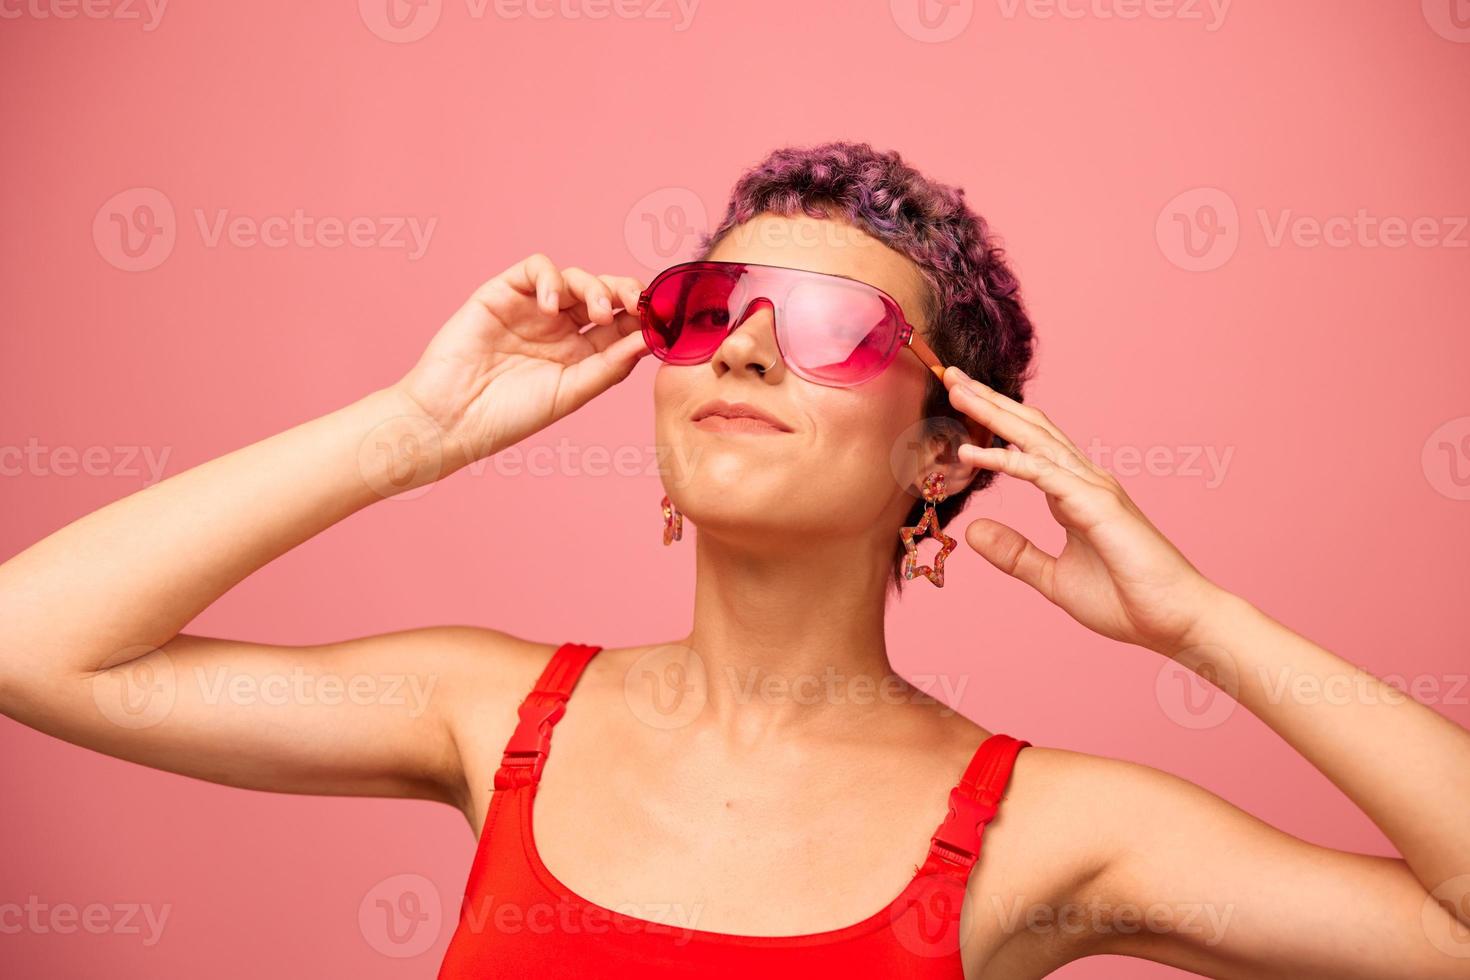 Fashion portrait of a woman with a short haircut in colored sunglasses with unusual accessories with earrings smiling on a pink bright background with a fitness body dancing photo